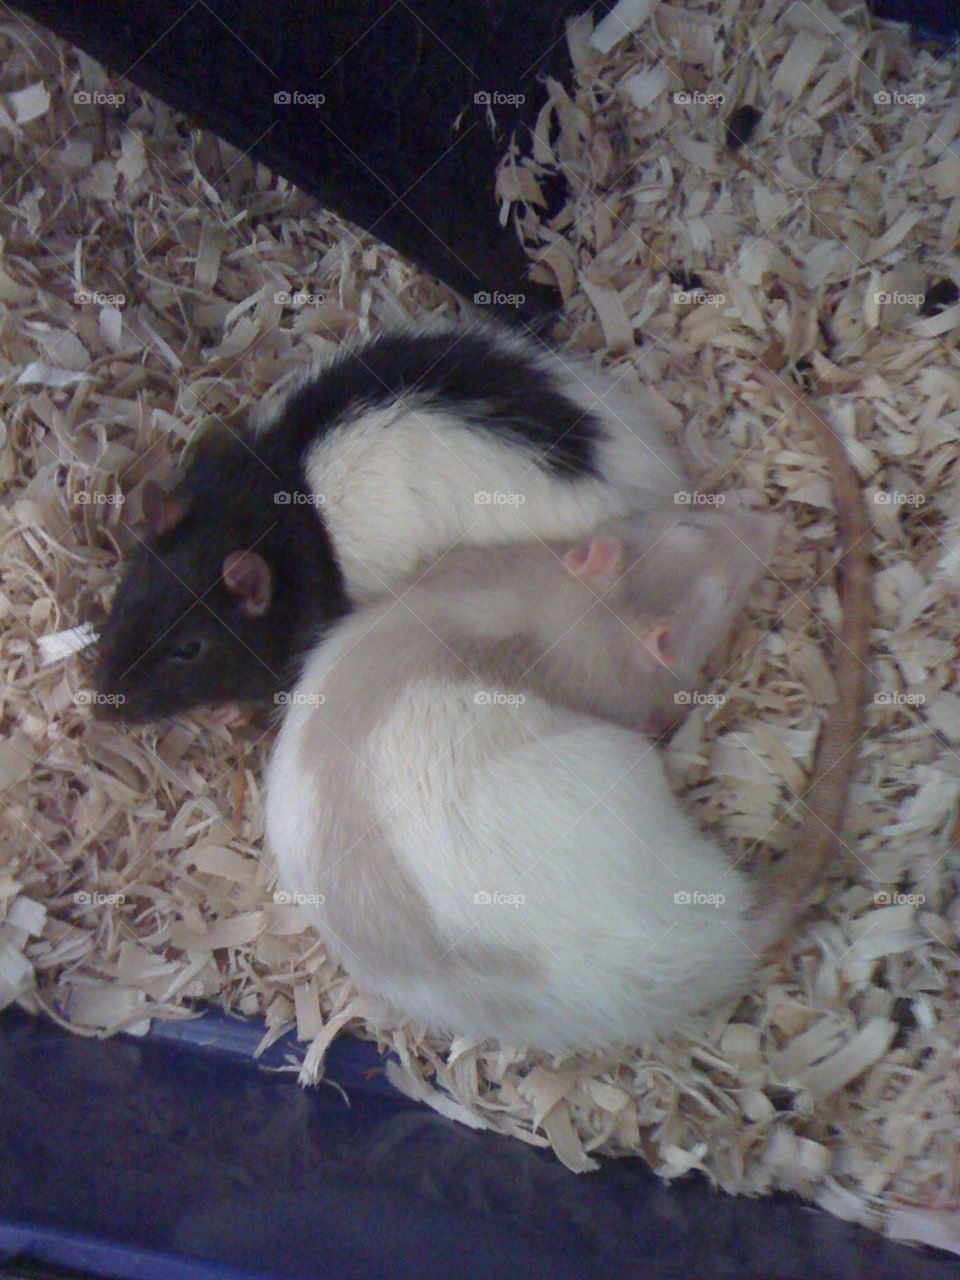 Darjee and Nimh my two pet rats